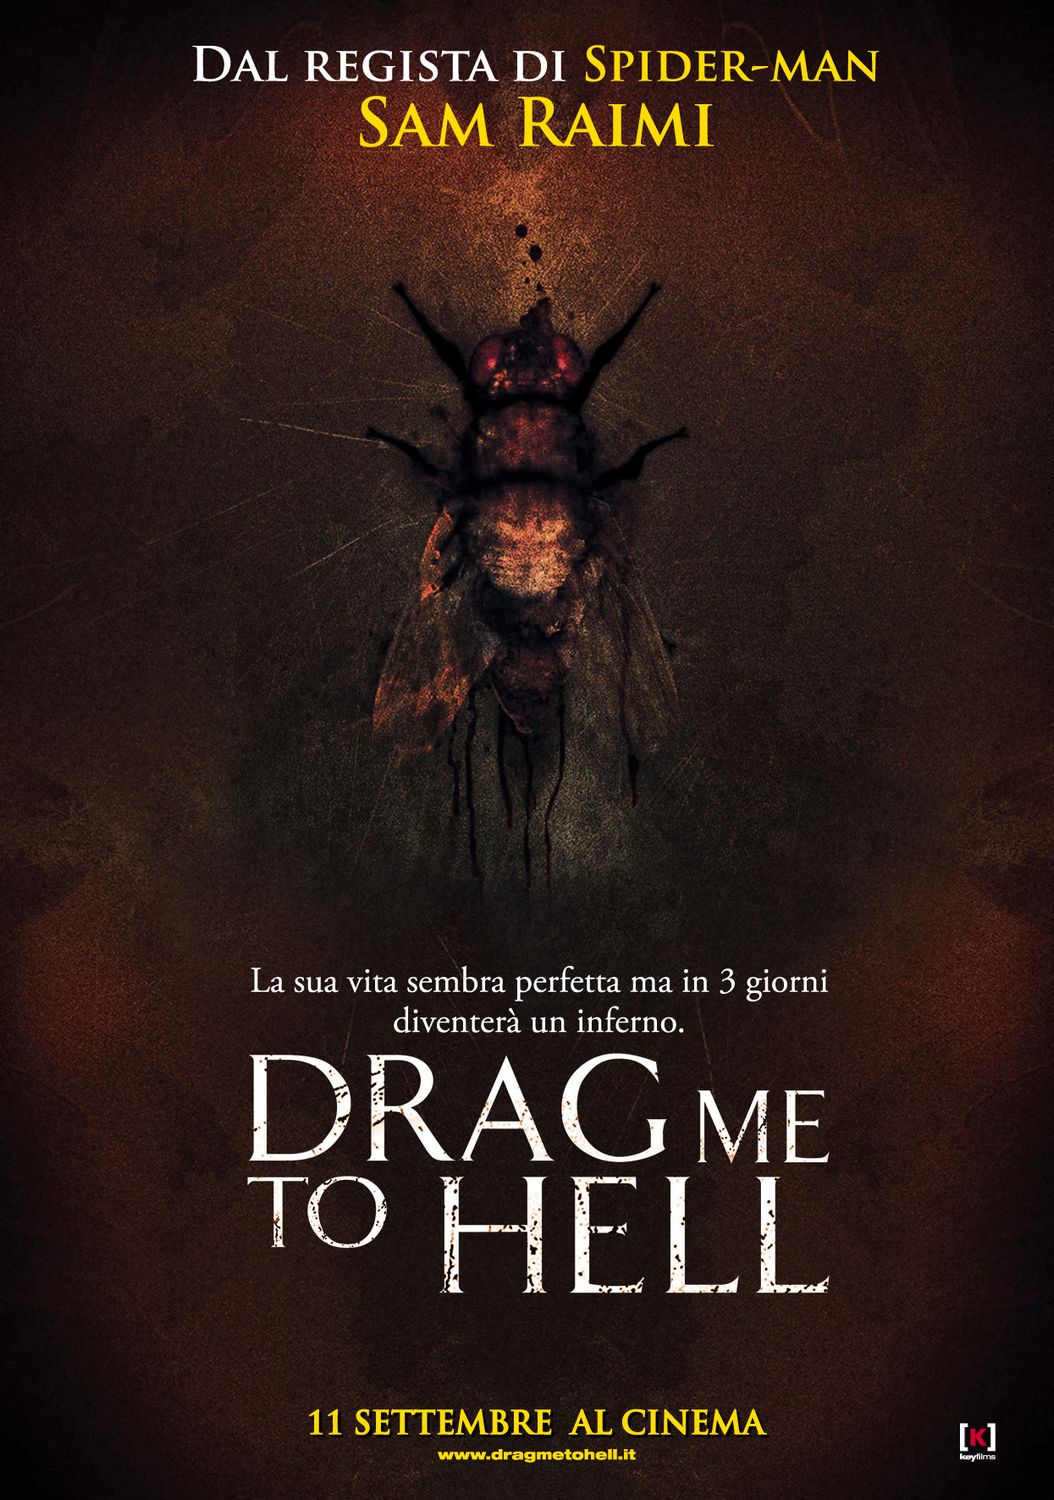 drag me to hell 2 full movie free download